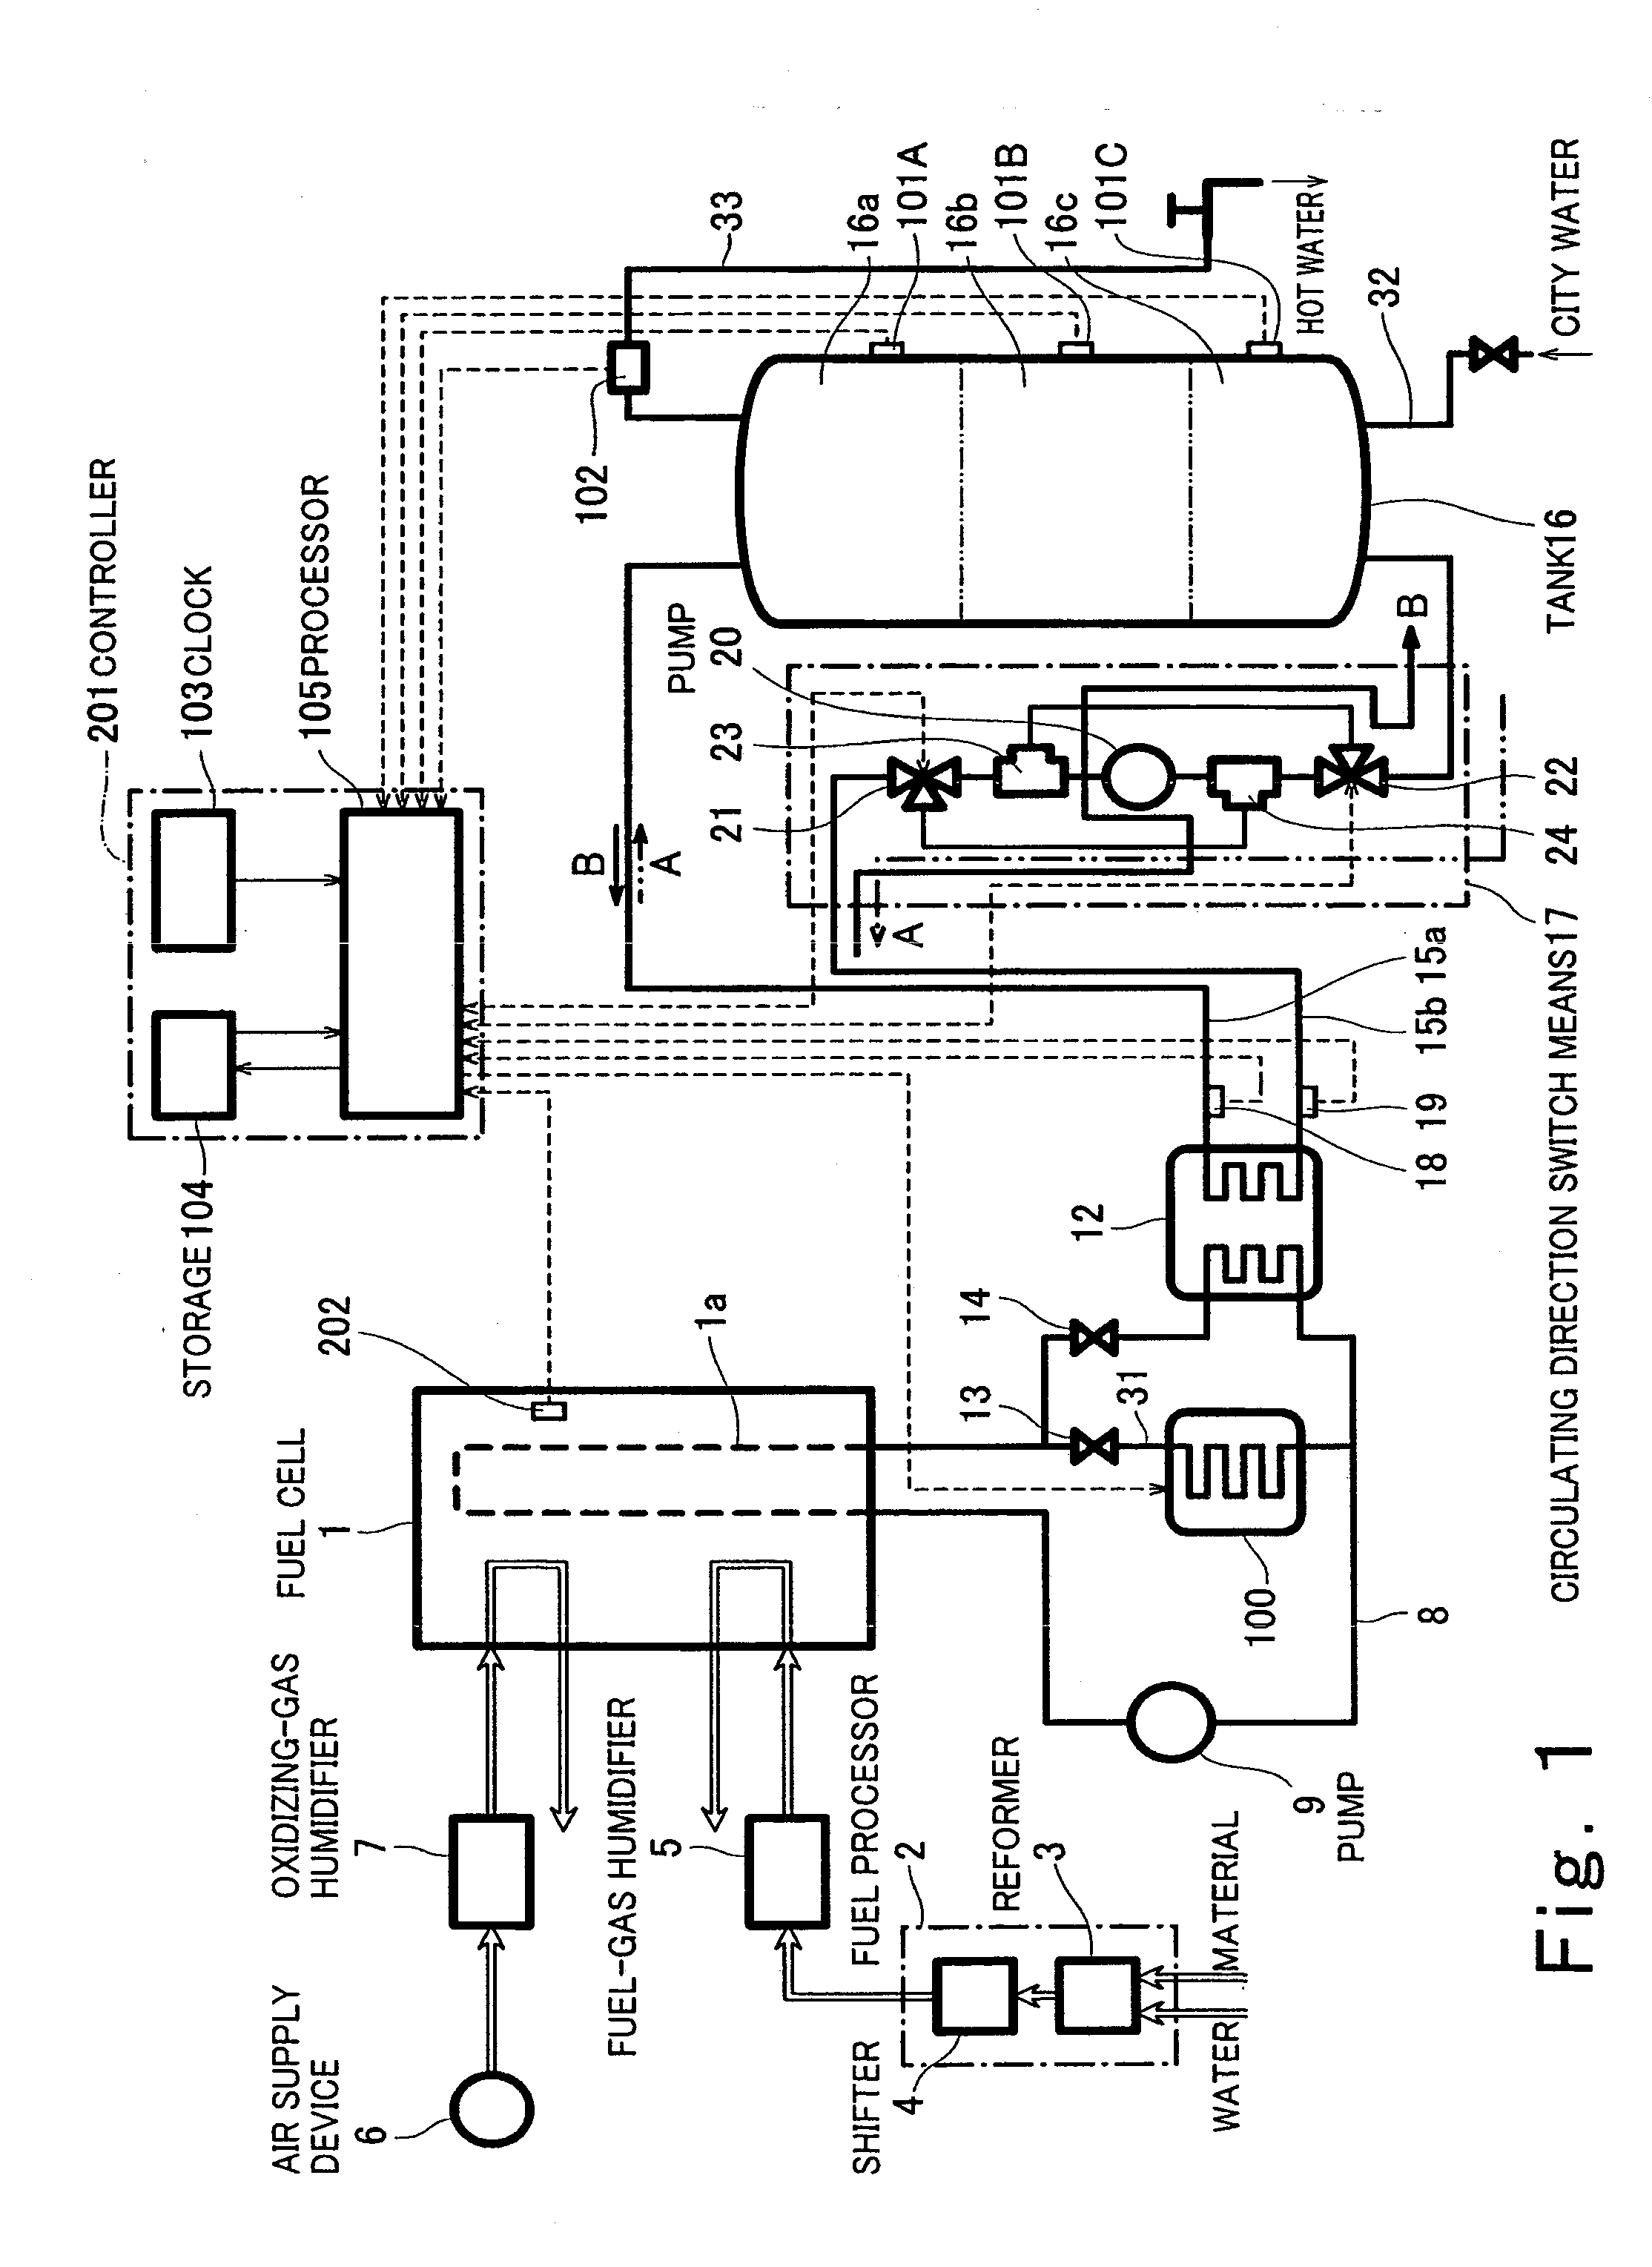 Fuel cell cogeneration system, method of operating